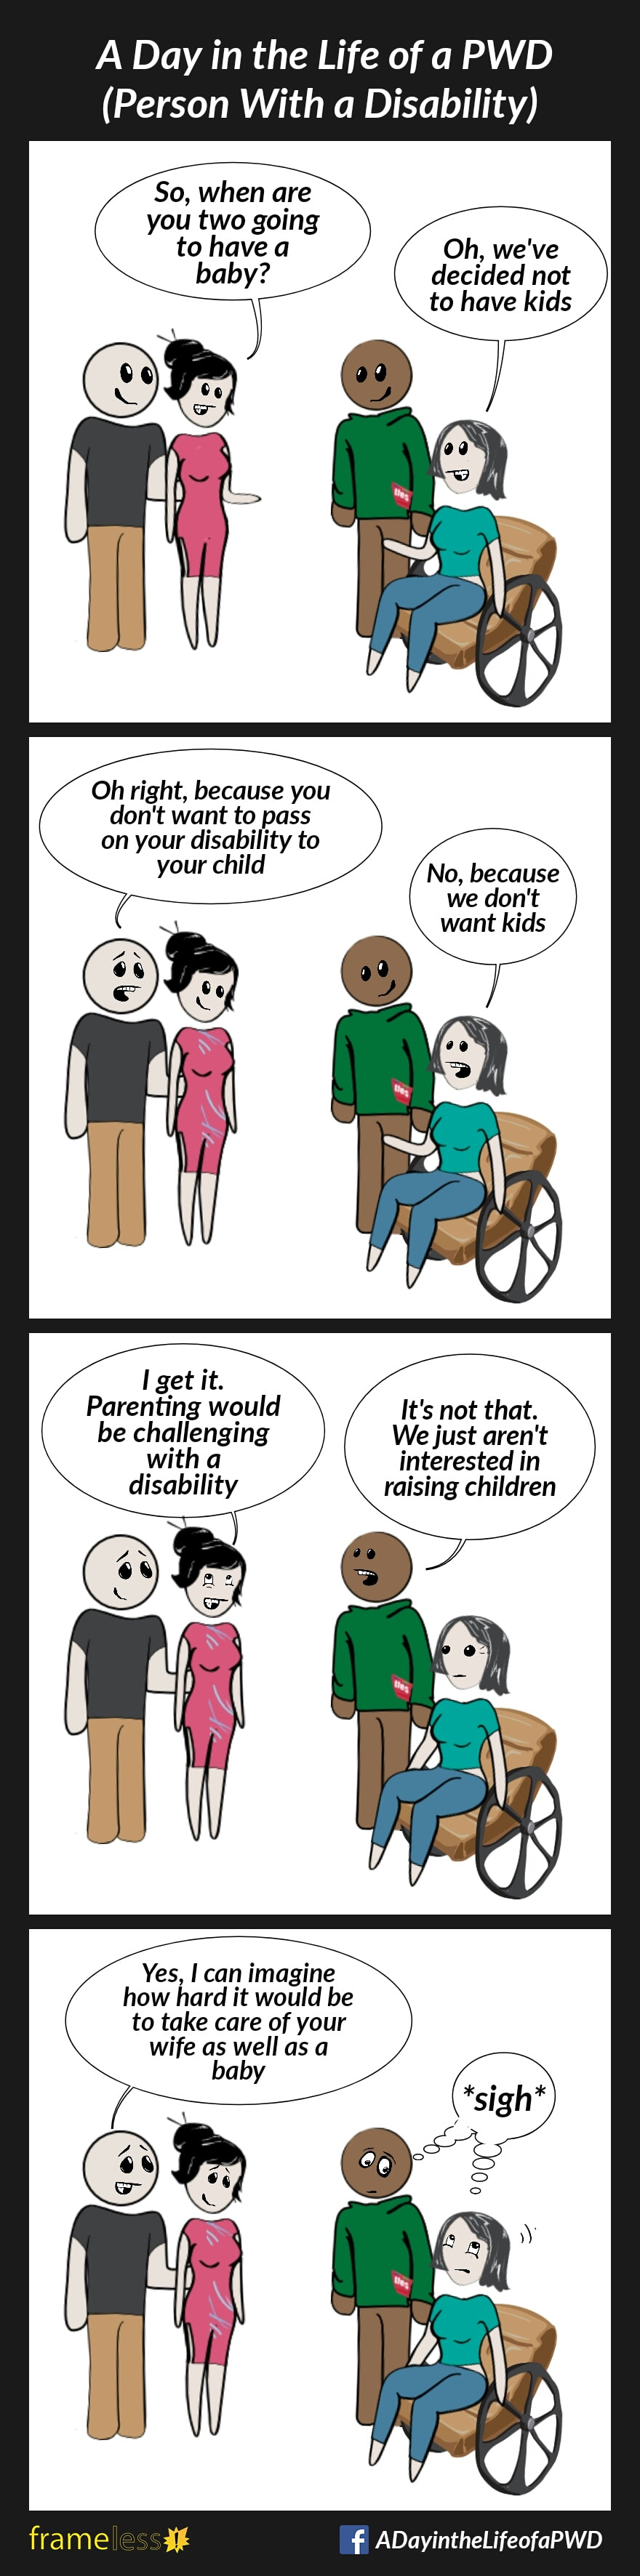 COMIC STRIP 
A Day in the Life of a PWD (Person With a Disability) 

Frame 1:
A wife in a wheelchair and her husband are chatting with two acquaintances.
ACQUAINTANCE A: So, when are you two going to have a baby?
WIFE: Oh, we've decided not to have kids

Frame 2:
ACQUAINTANCE B: Oh right, because you don't want to pass your disability on to your child
WIFE: No, because we don't want kids

Frame 3:
ACQUAINTANCE A: I get it. Parenting would be challenging with a disability. 
HUSBAND: It's not that. We're just not interested in raising children

Frame 4:
ACQUAINTANCE B: Yes, I can imagine how hard it would be to take care of your wife as well as a baby
Wife and husband roll their eyes, exchanging a look and sighing internally.